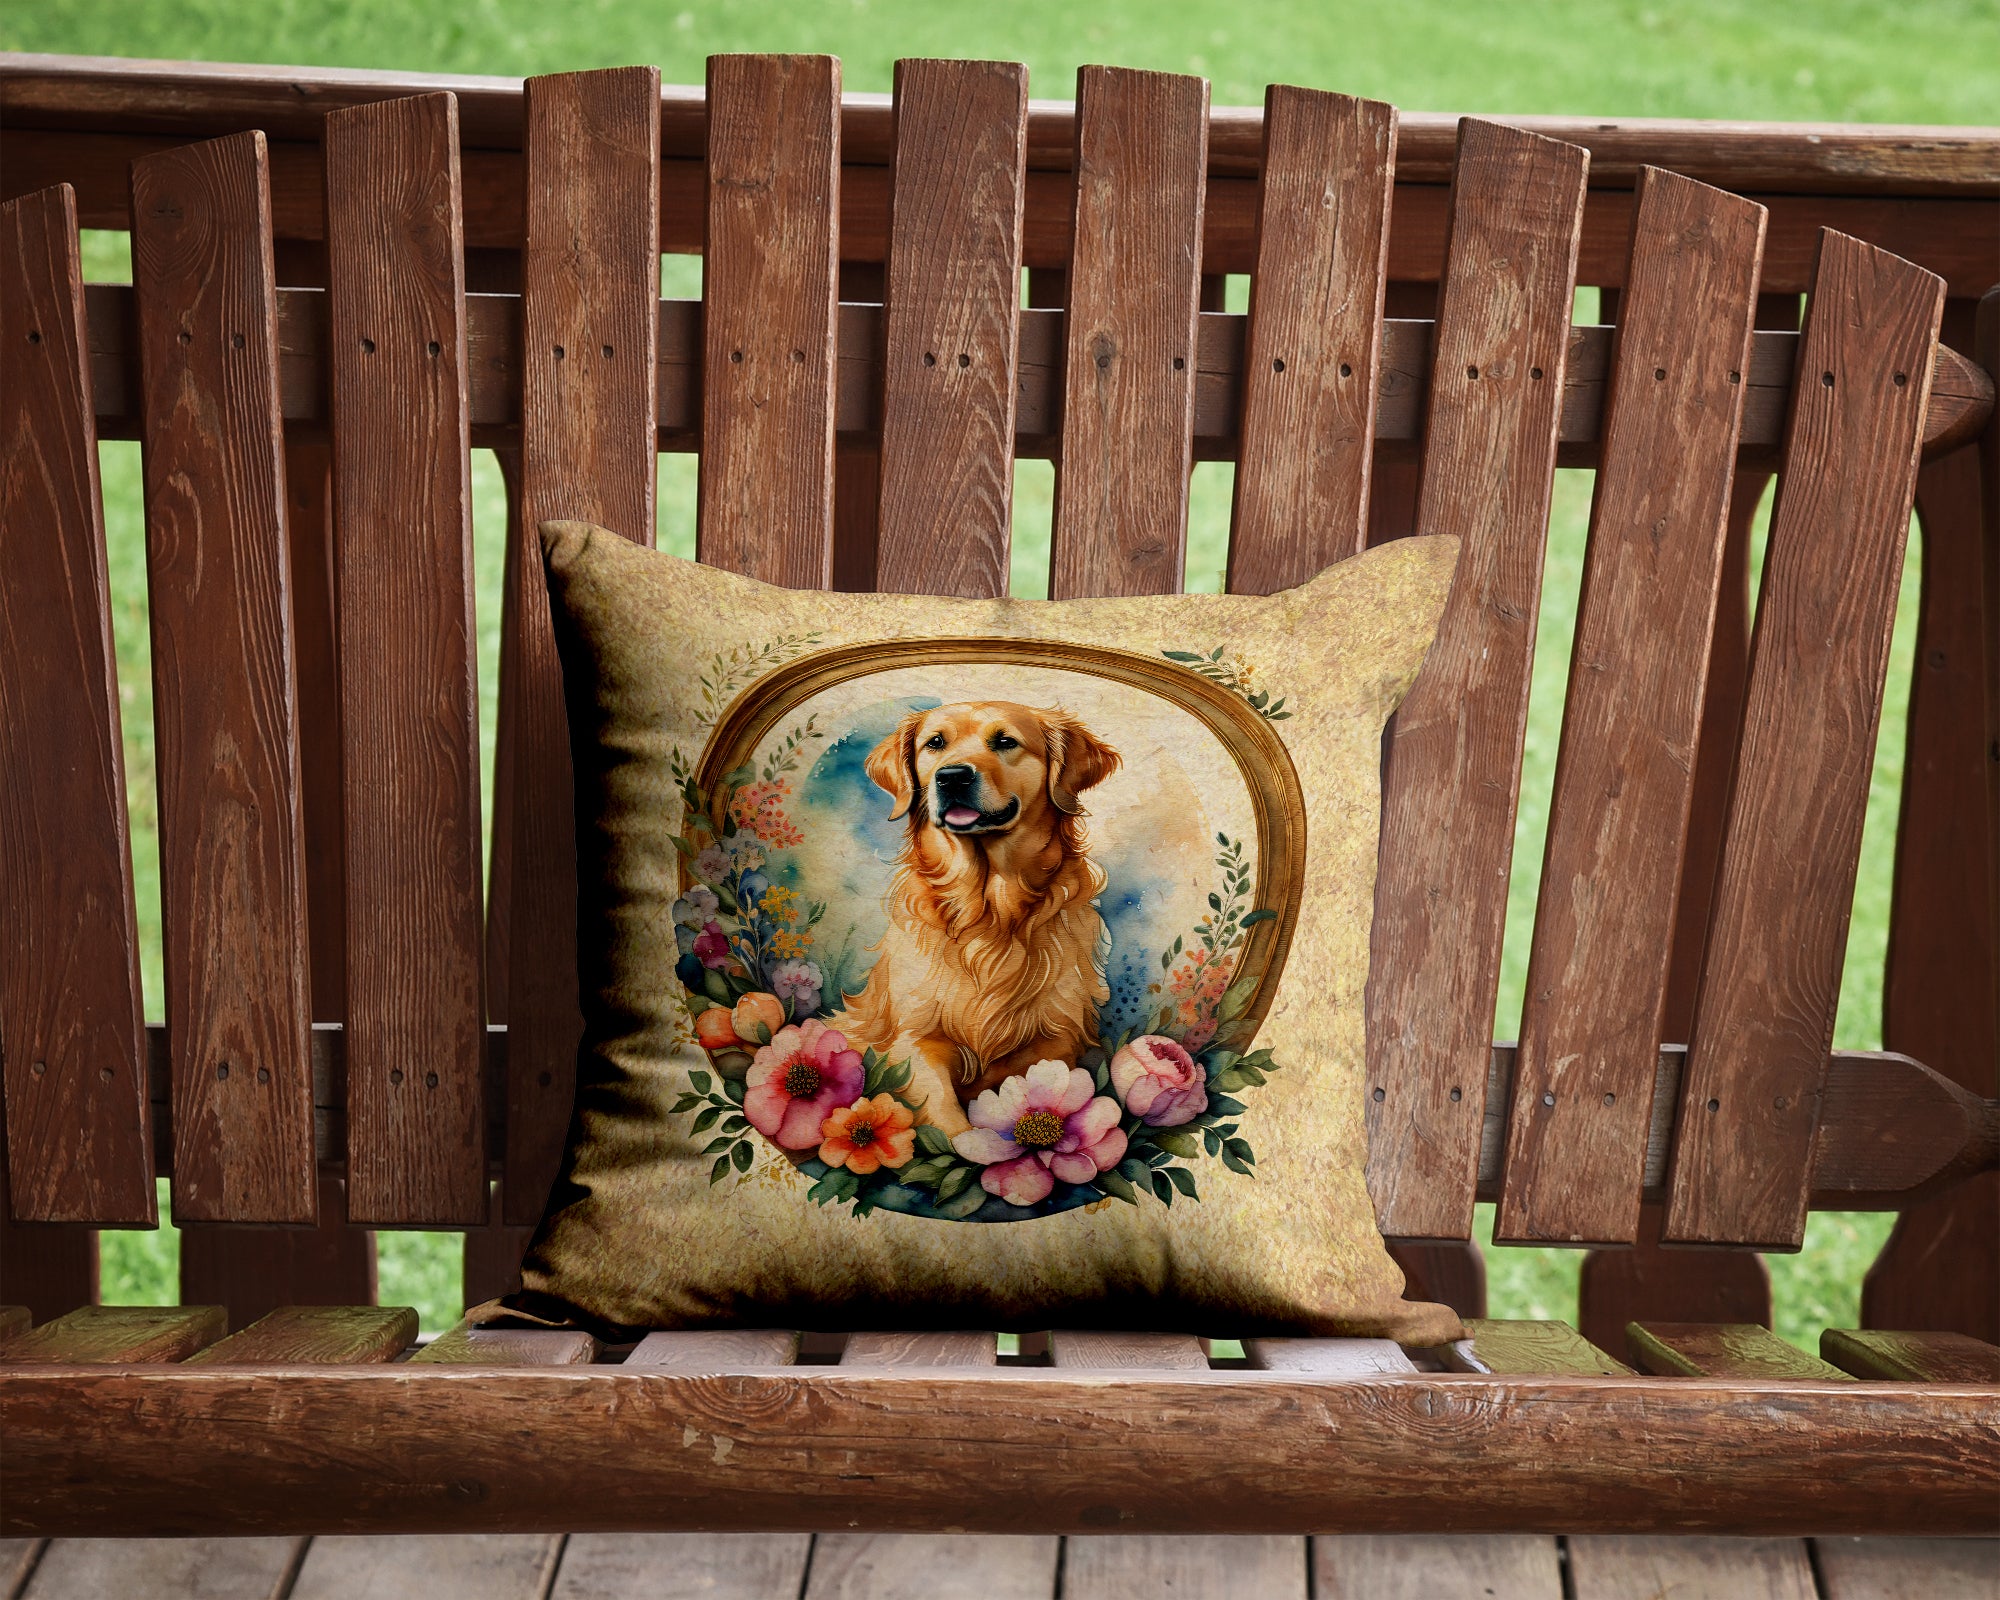 Buy this Golden Retriever and Flowers Fabric Decorative Pillow